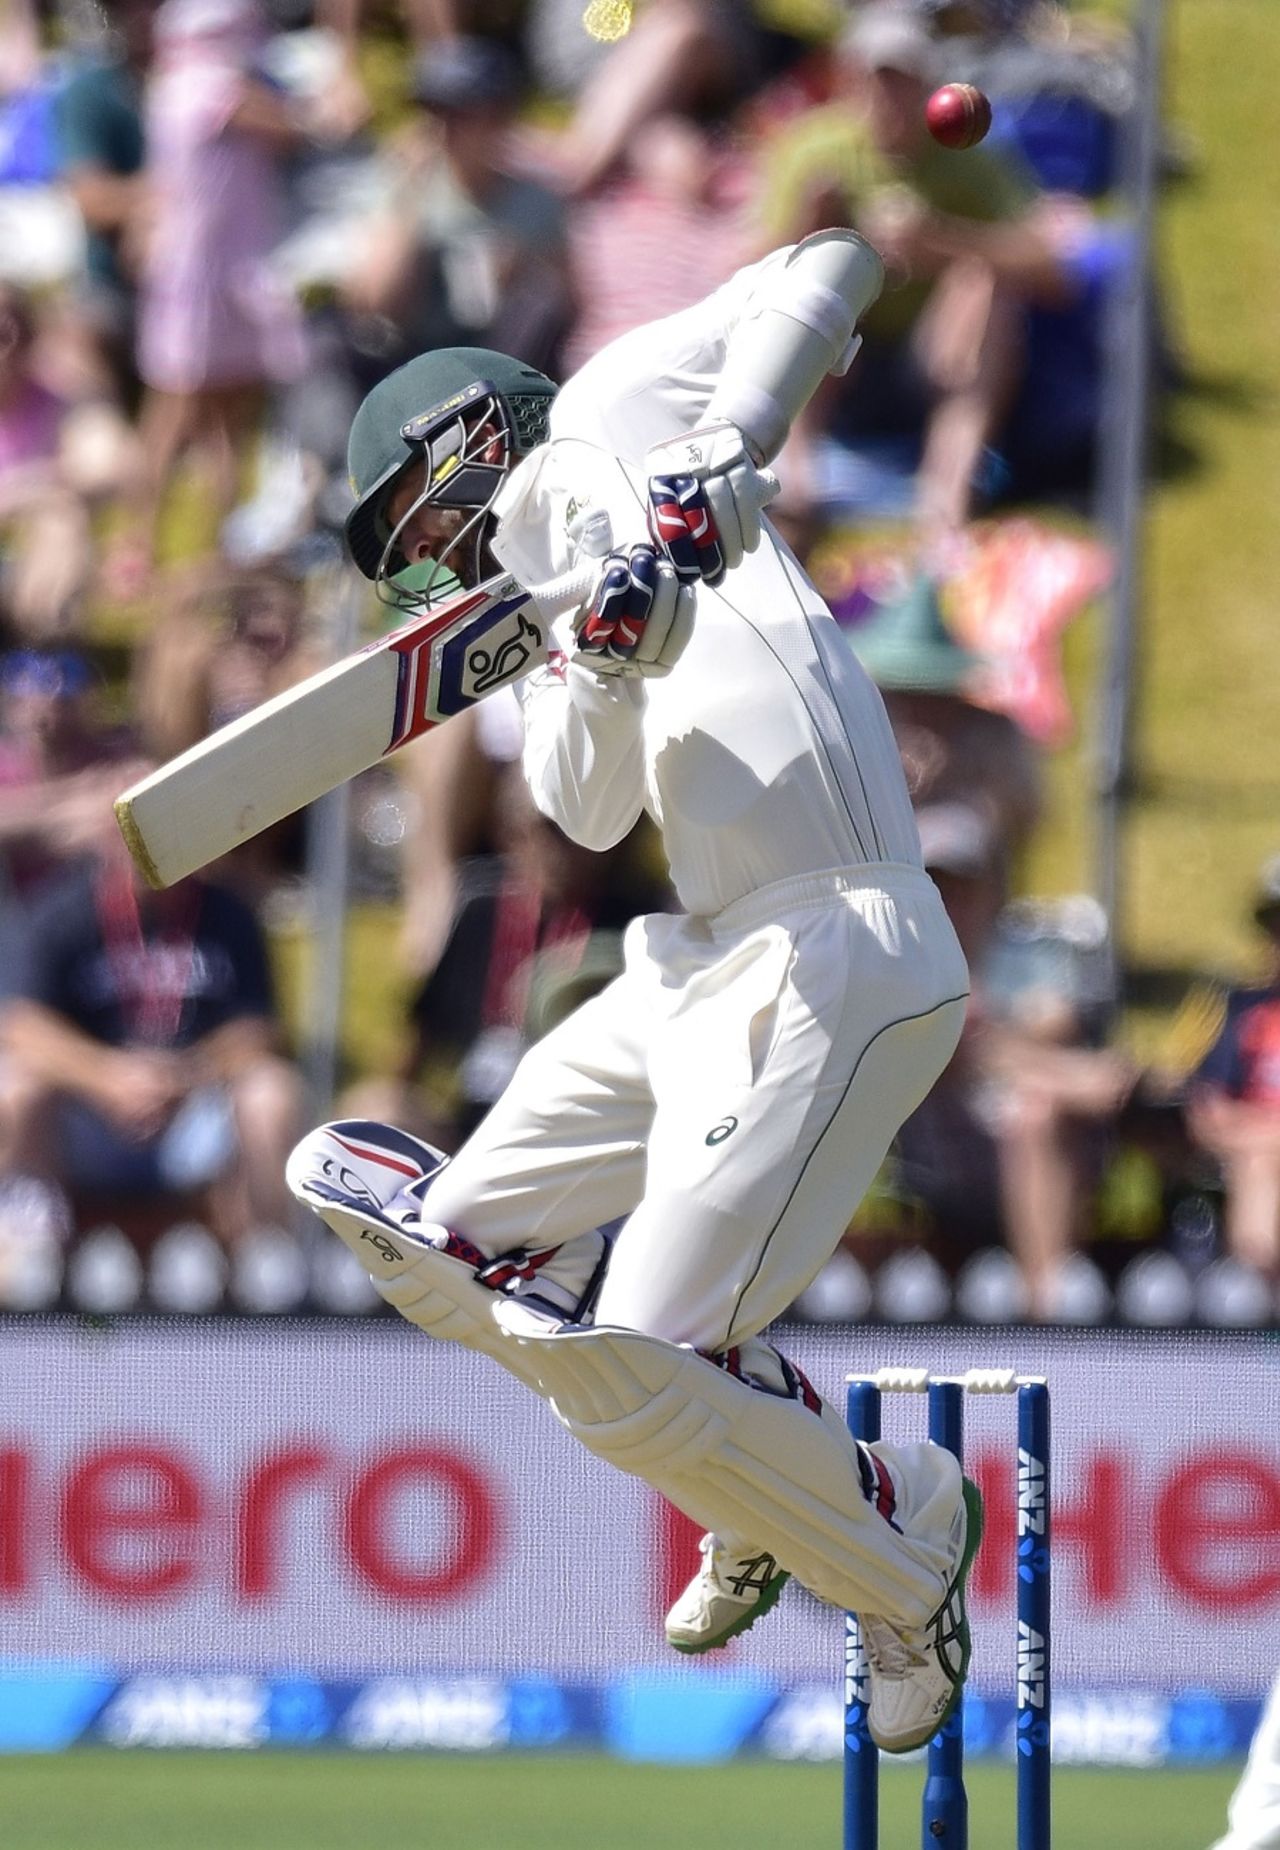 Nathan Lyon gets into a tangle against a bouncer  from Corey Anderson, New Zealand v Australia, 1st Test, Wellington, 3rd day, February 14, 2016